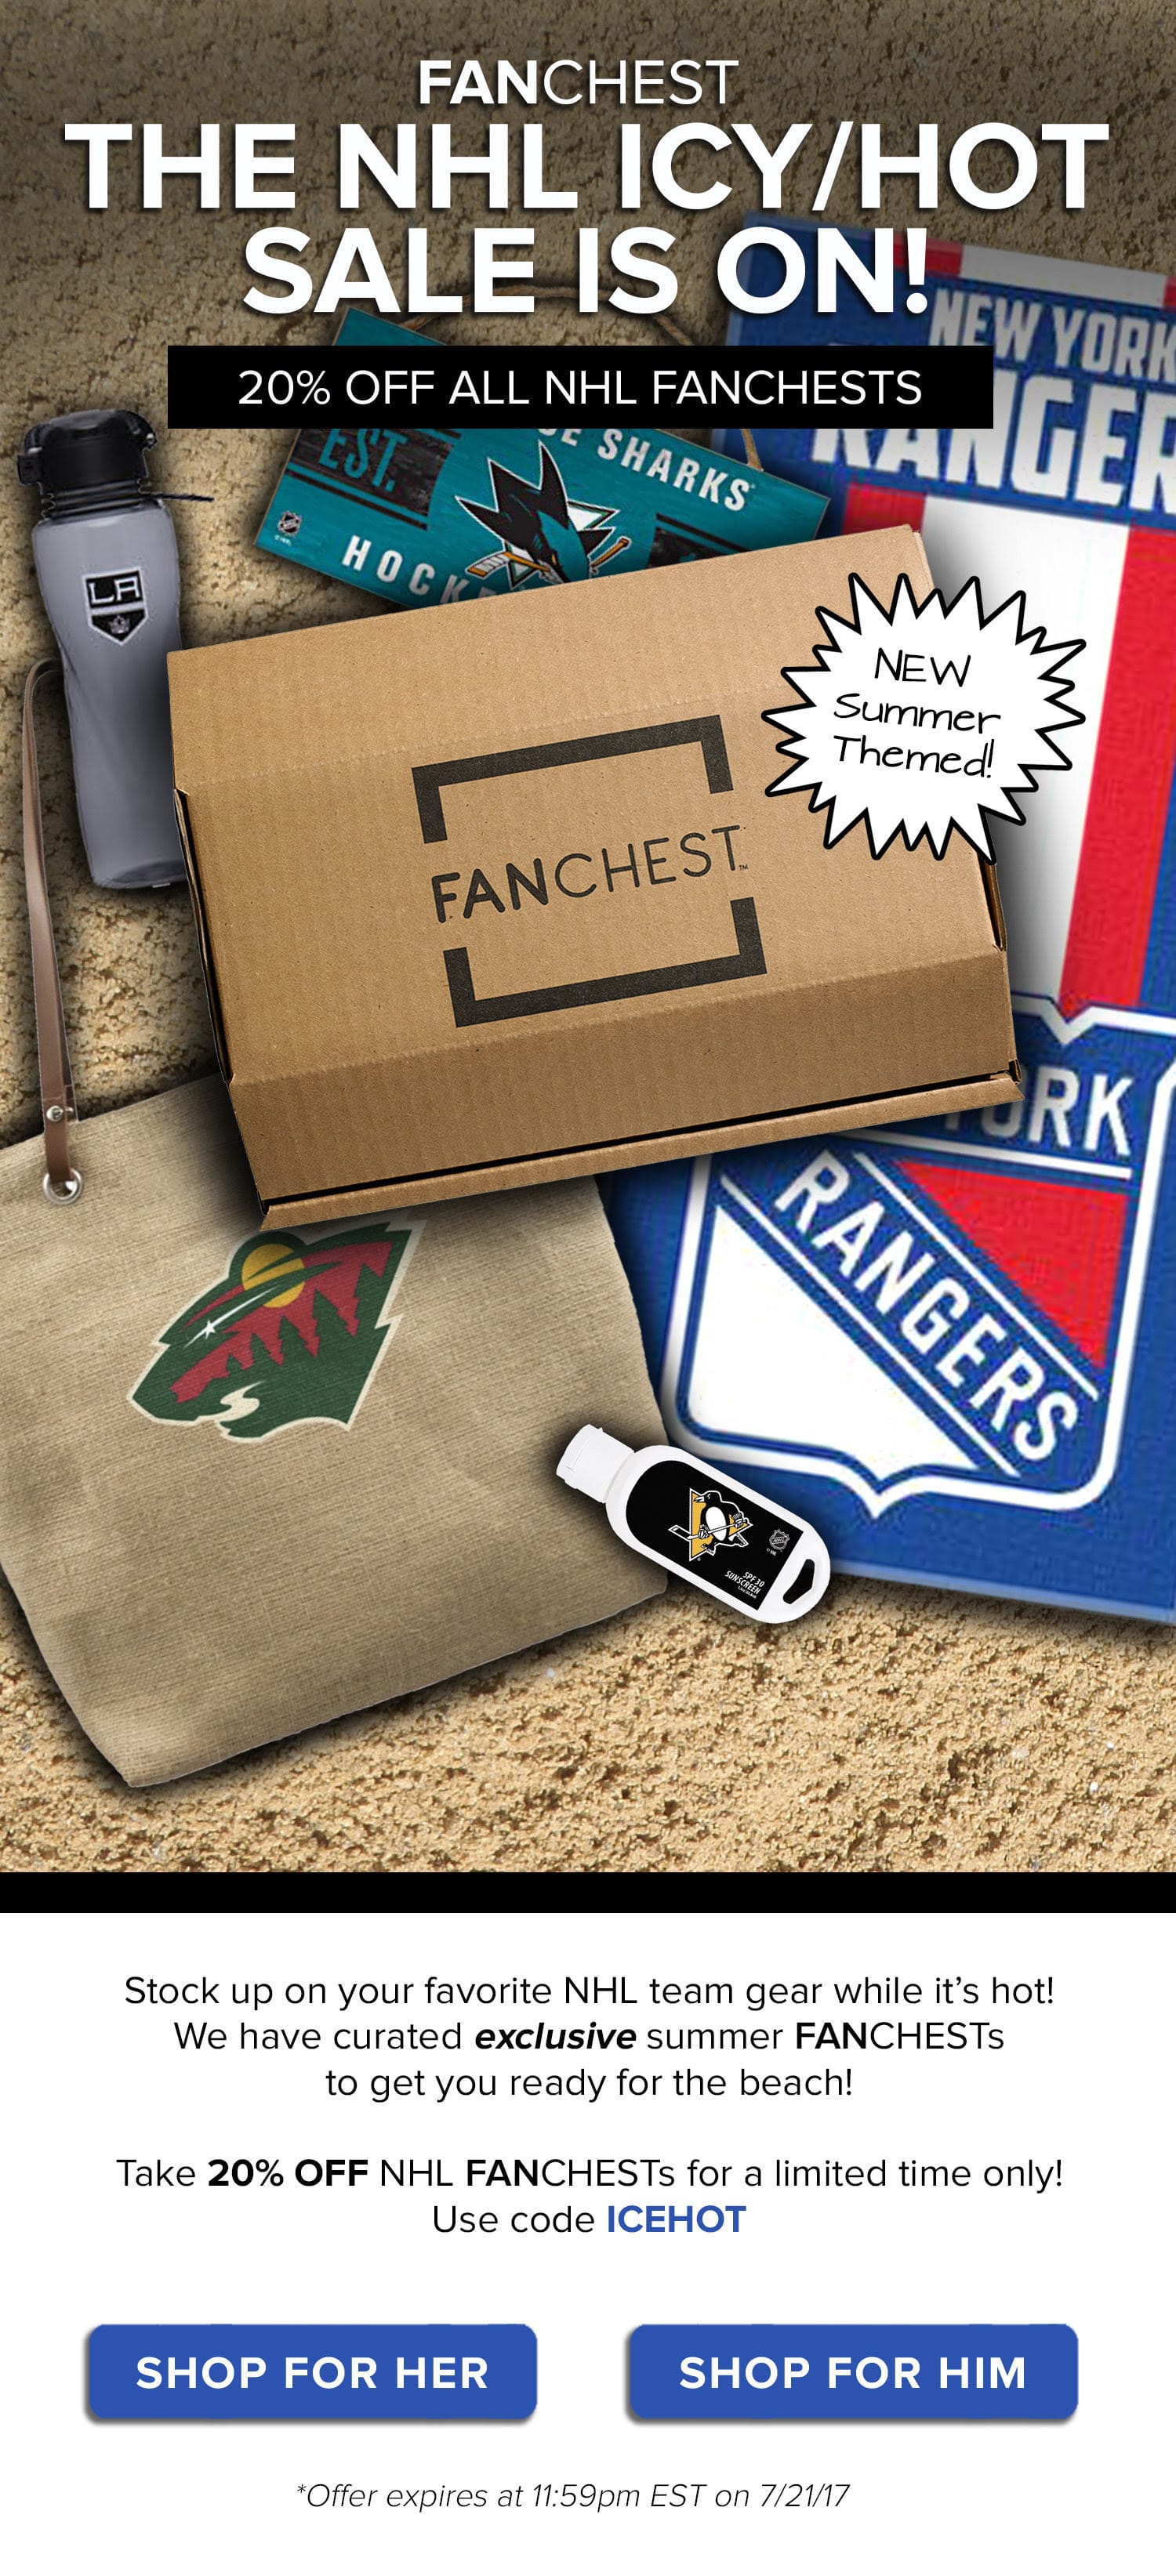 2 Days Only! 20% Off All NHL Fanchests!